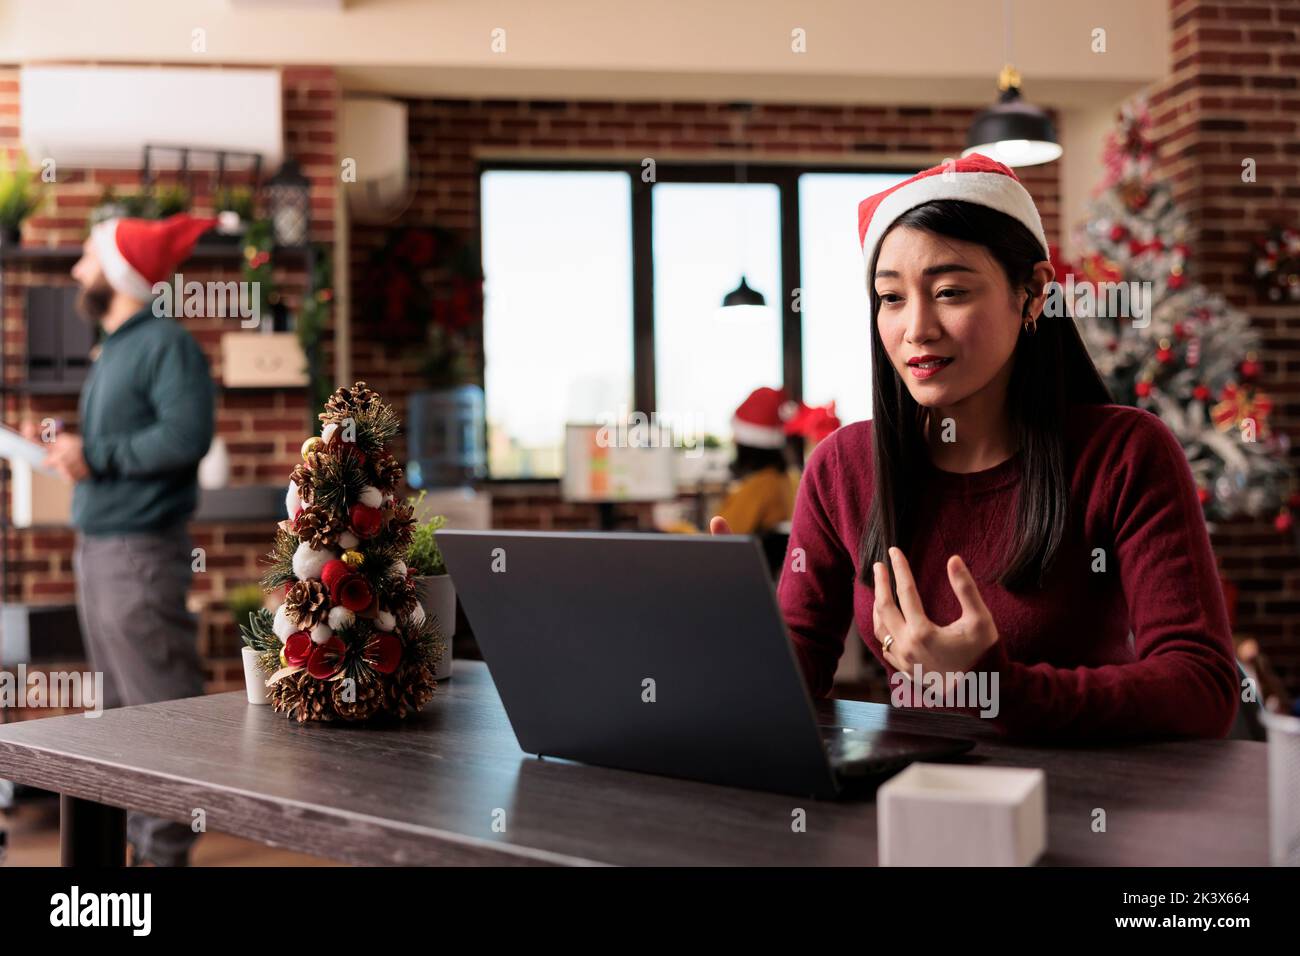 Businesswoman attending videocall meeting in office decorated with christmas tree. Talking on online remote videoconference and teleconference call in workplace with holiday ornaments. Stock Photo